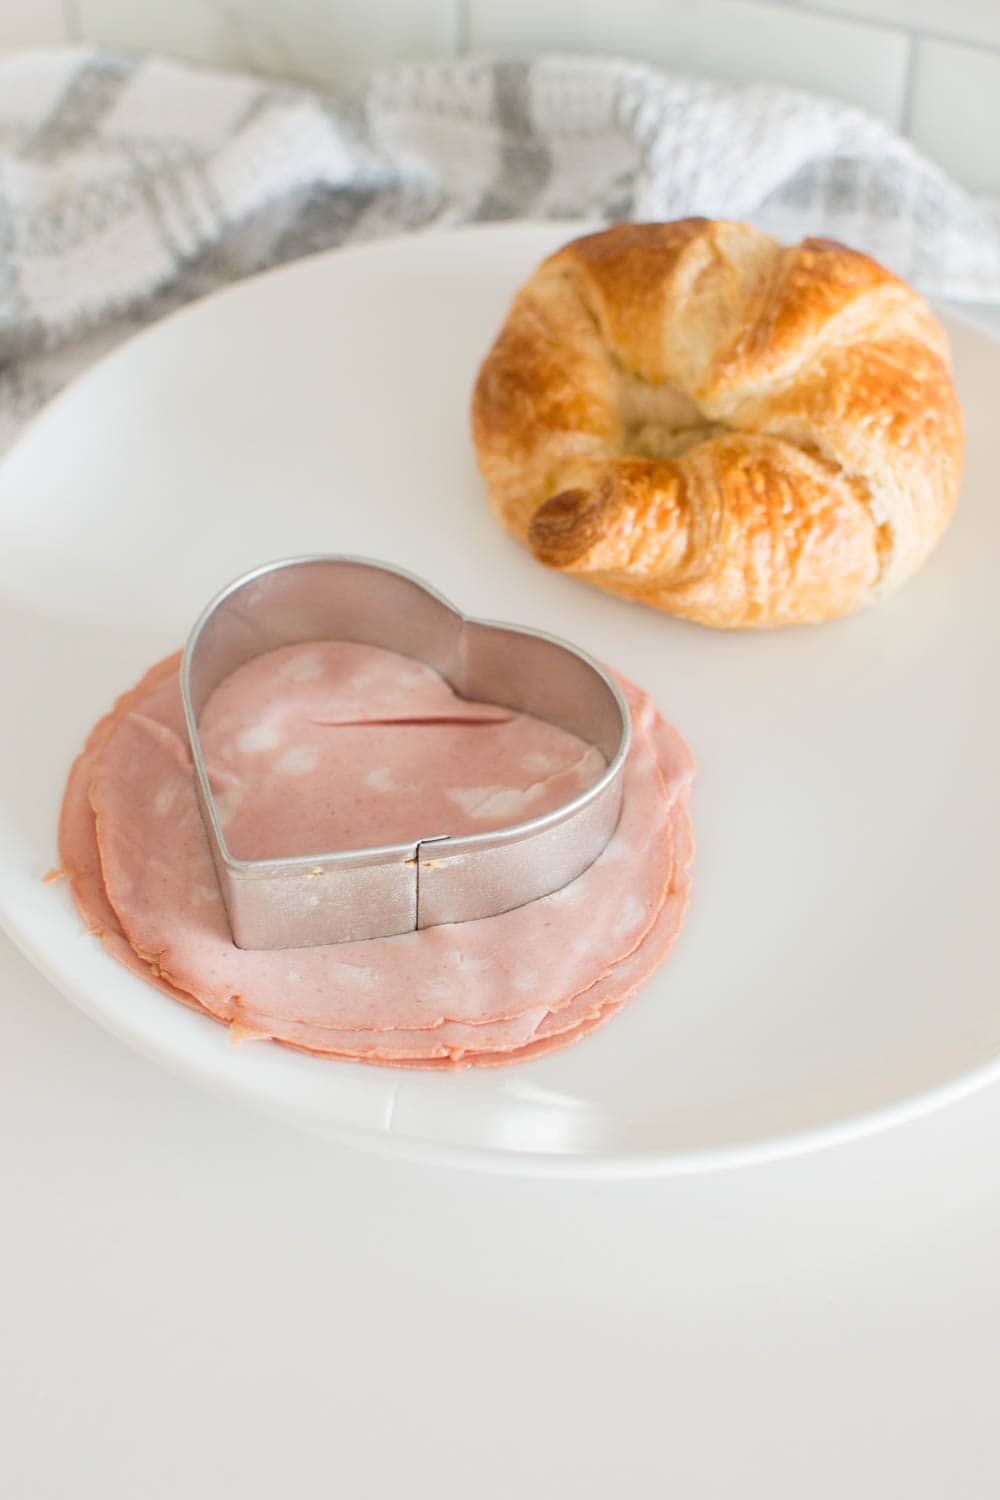 Cutting into a stack of luncheon meat on a white plate with a heart-shaped cookie cutter